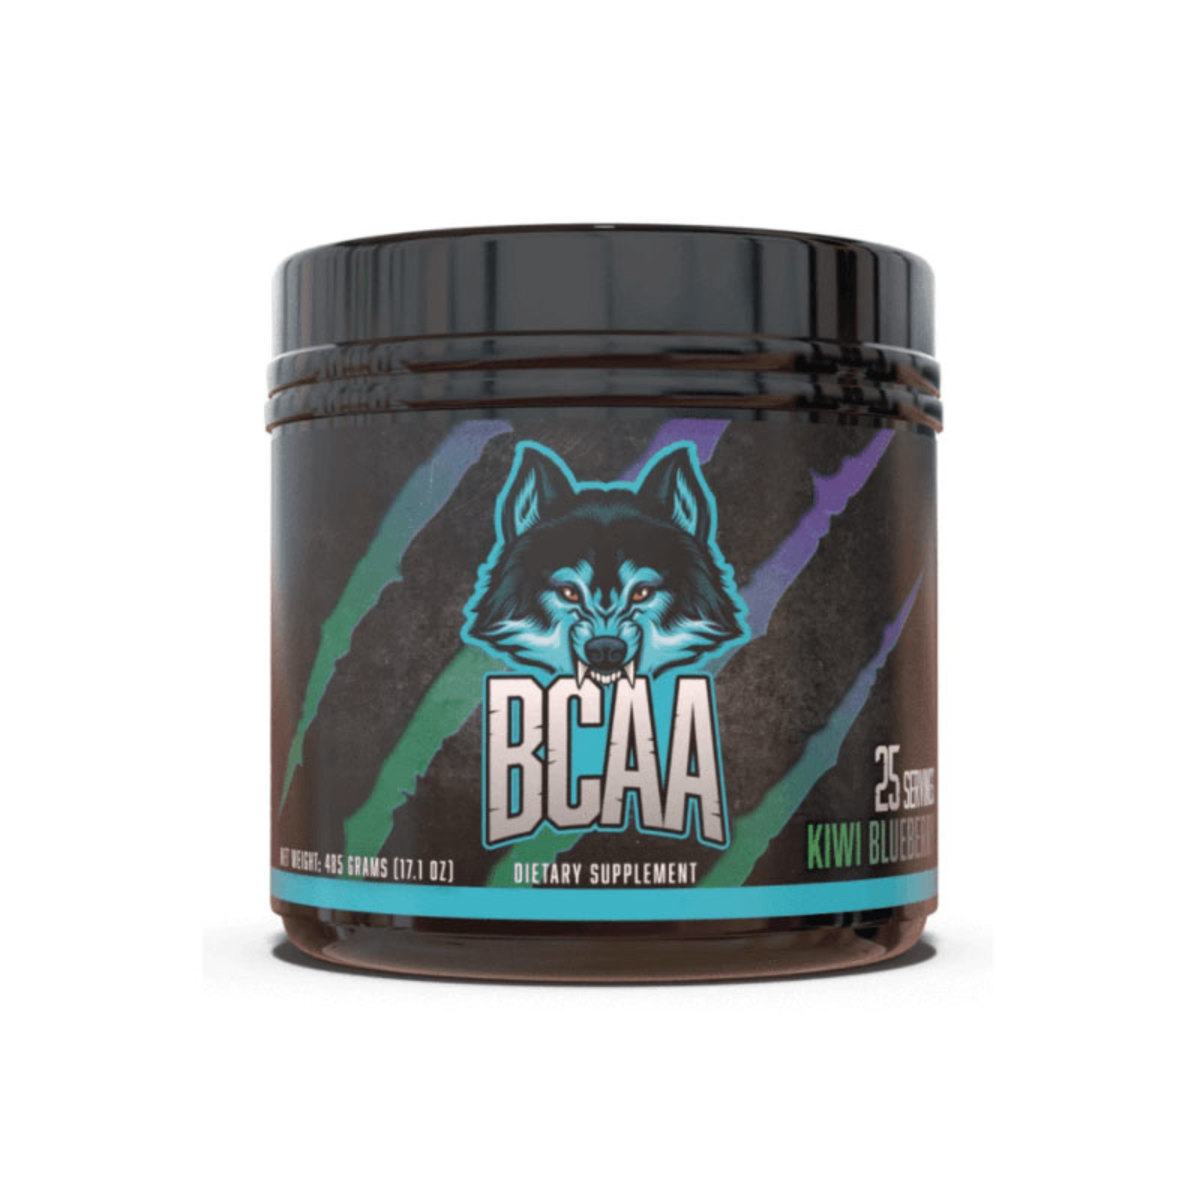 The 5 Best Post-Workout Recovery Supplements (2021) Huge BCAA